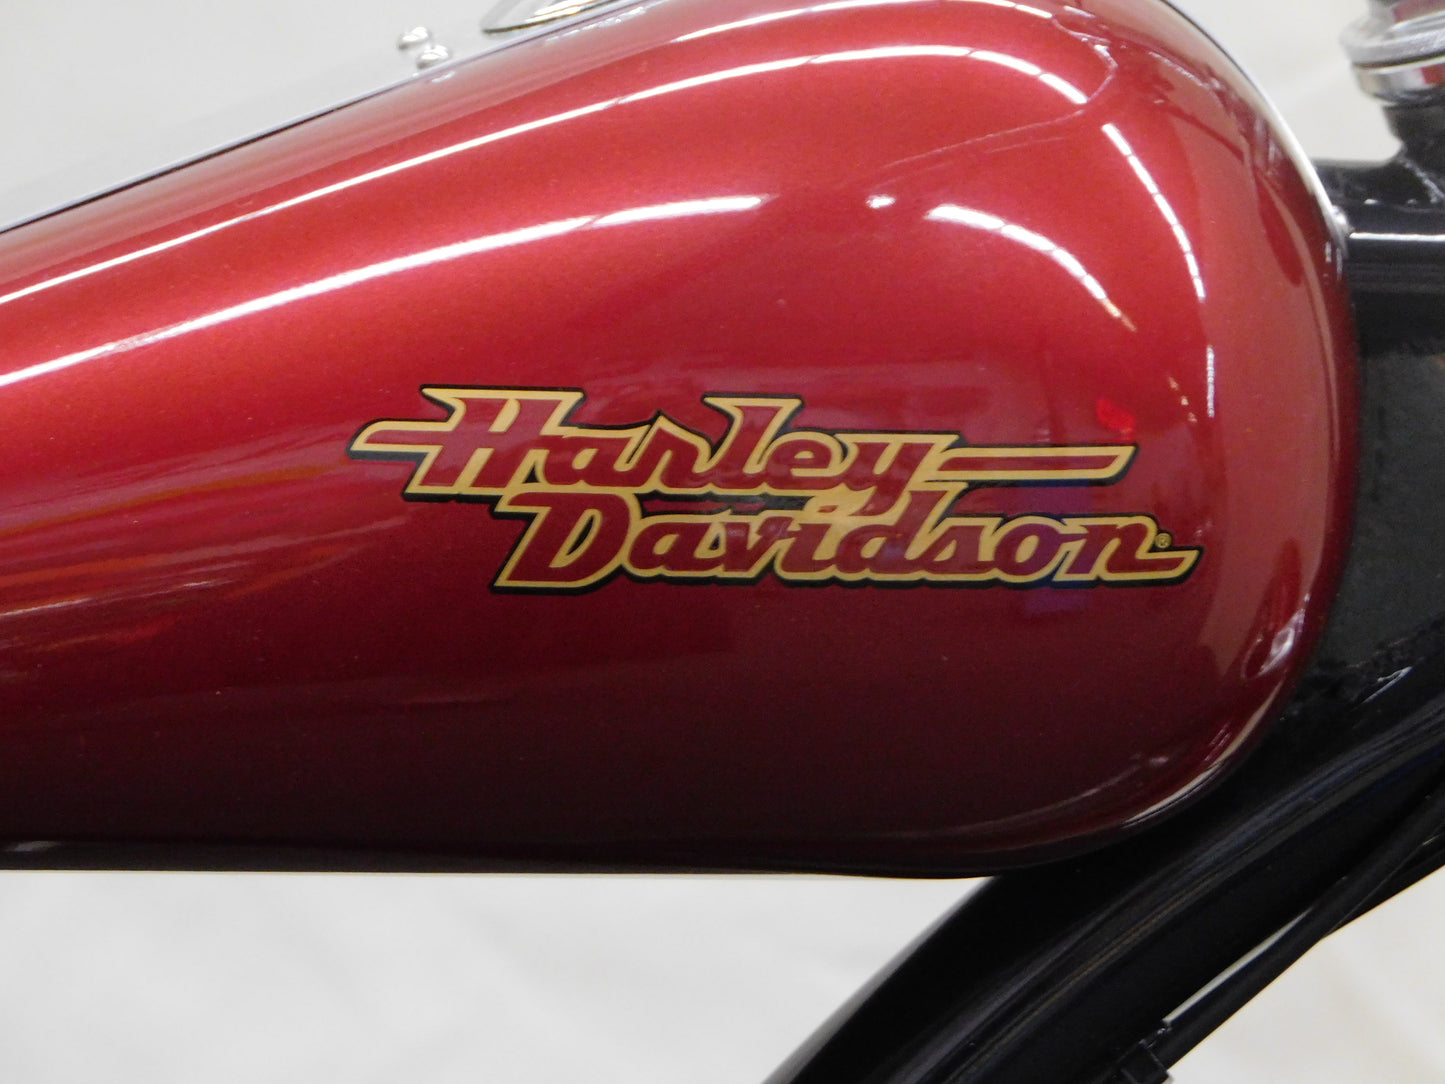 1998 Harley-Davidson Limited Edition Velo Glide Bicycle